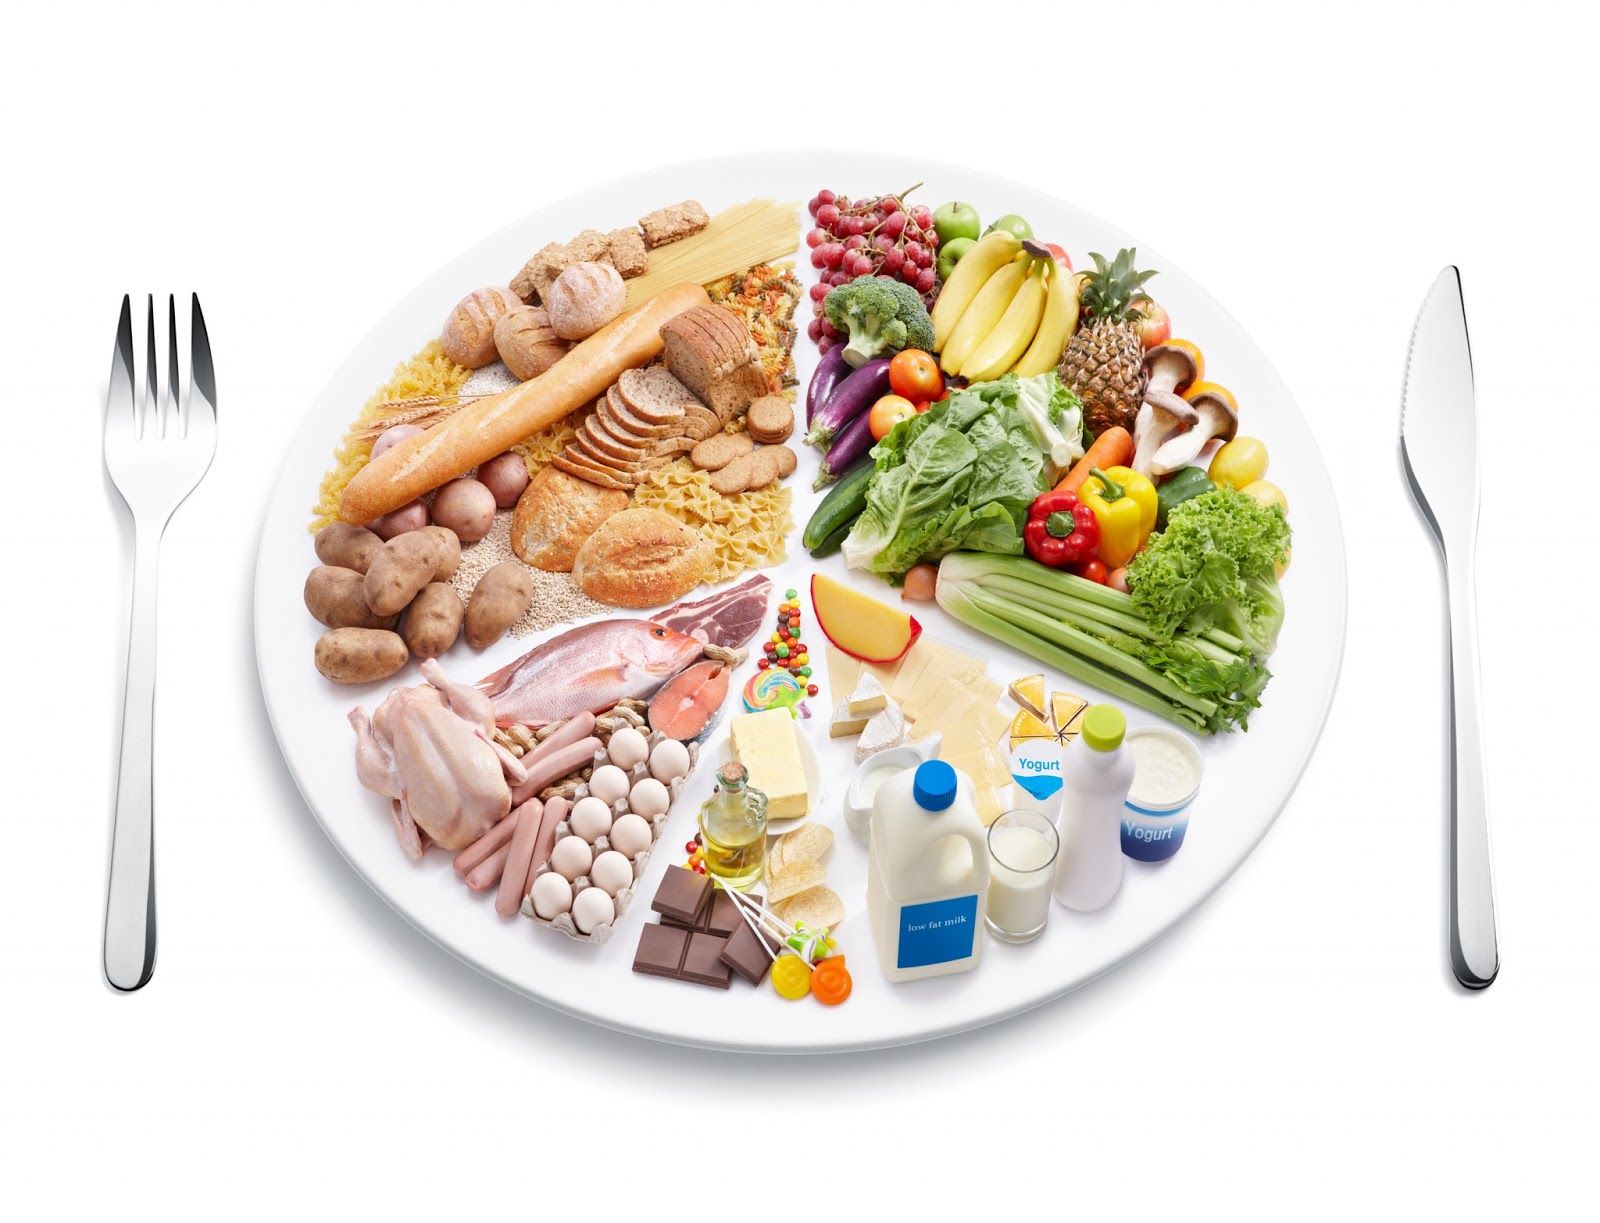 Eat a variety of foods for a healthy lifestyle | dprince4christ blog